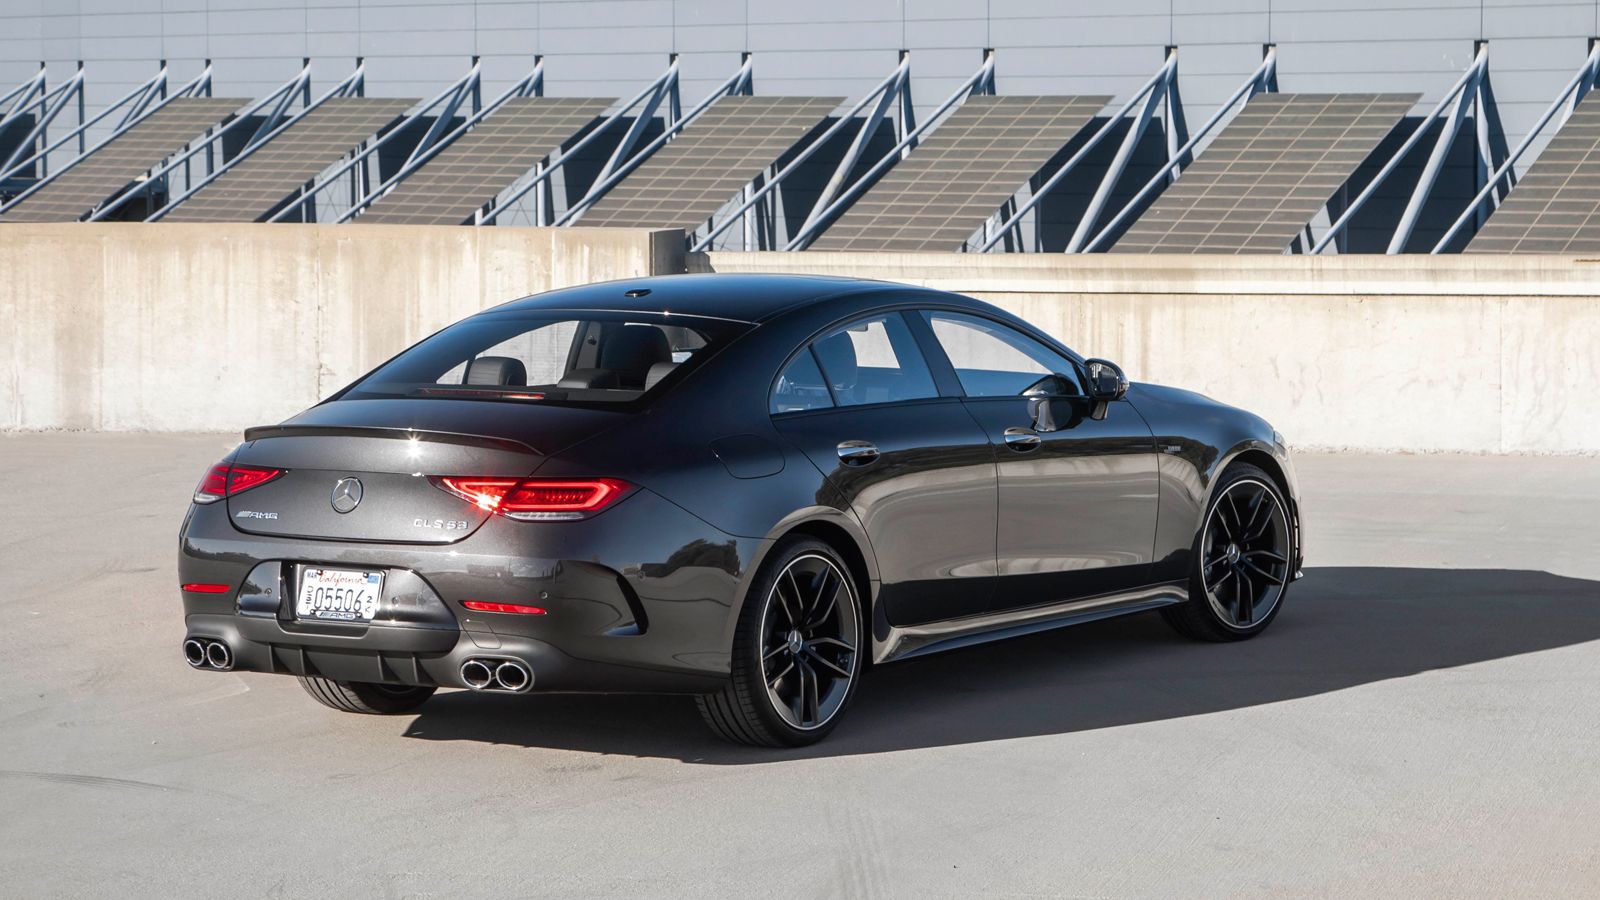 2019 Mercedes-AMG CLS53 essentials: Style and substance